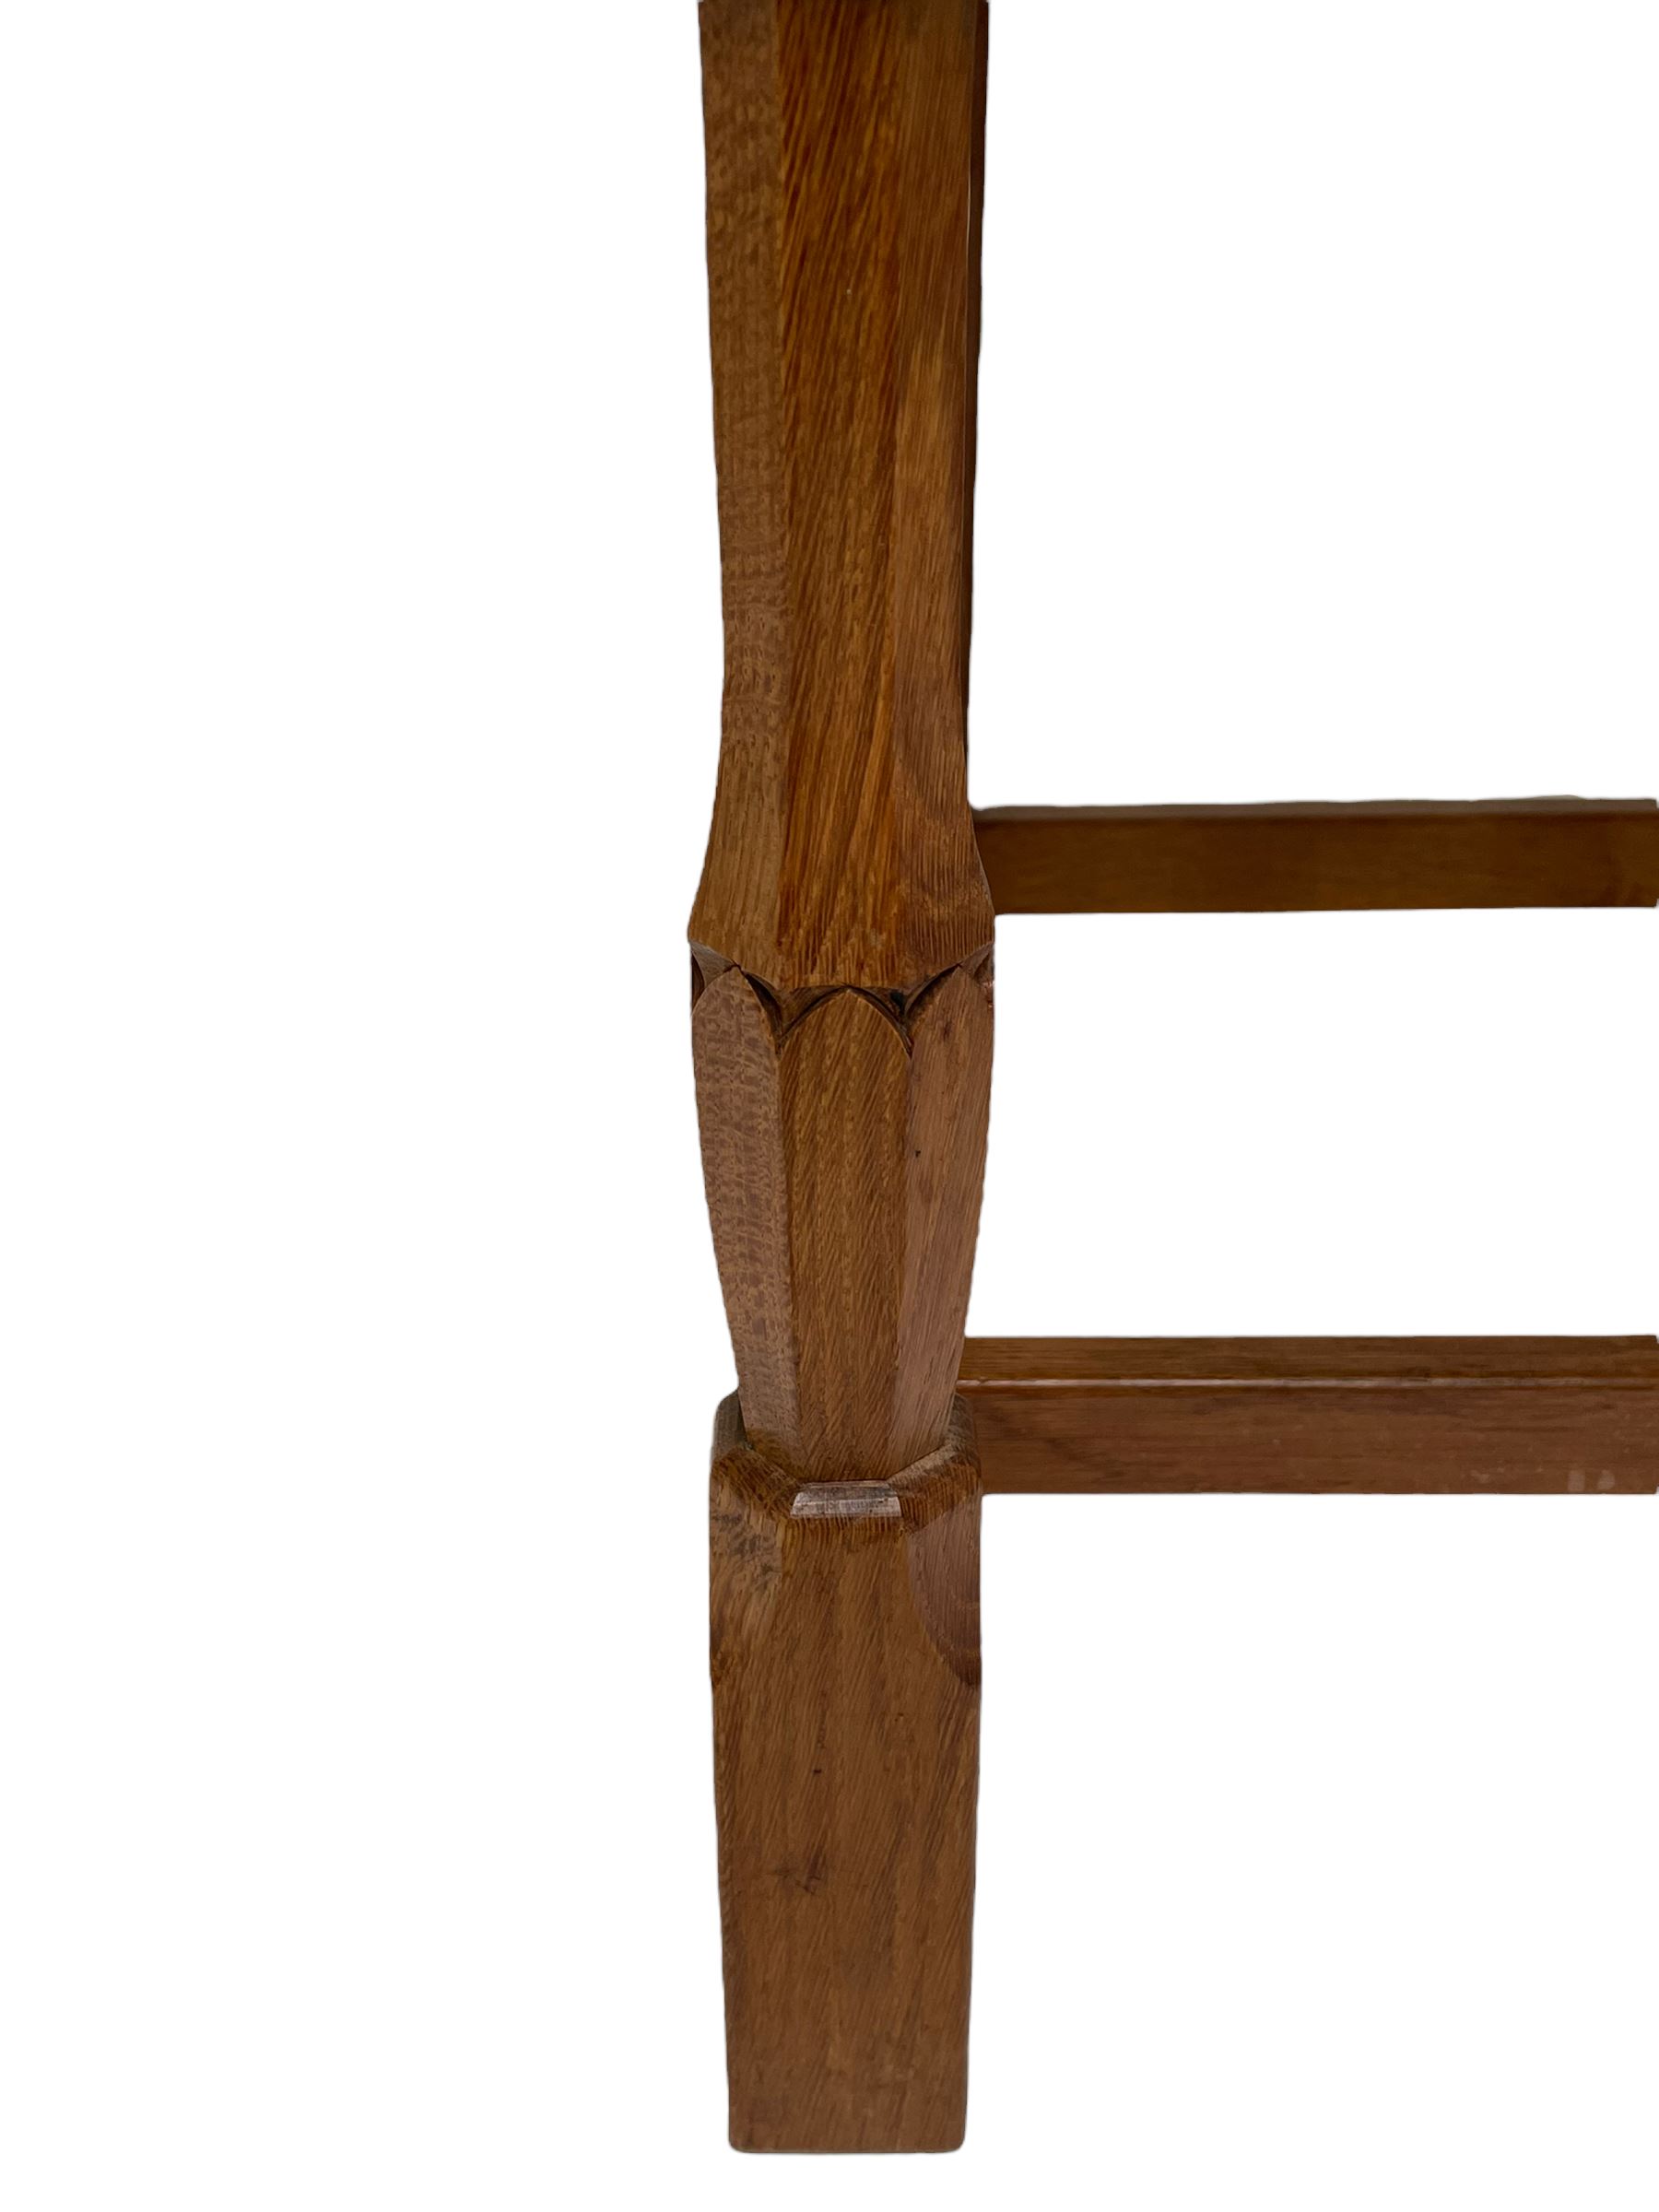 Wrenman - set four oak dining chairs - Image 6 of 10